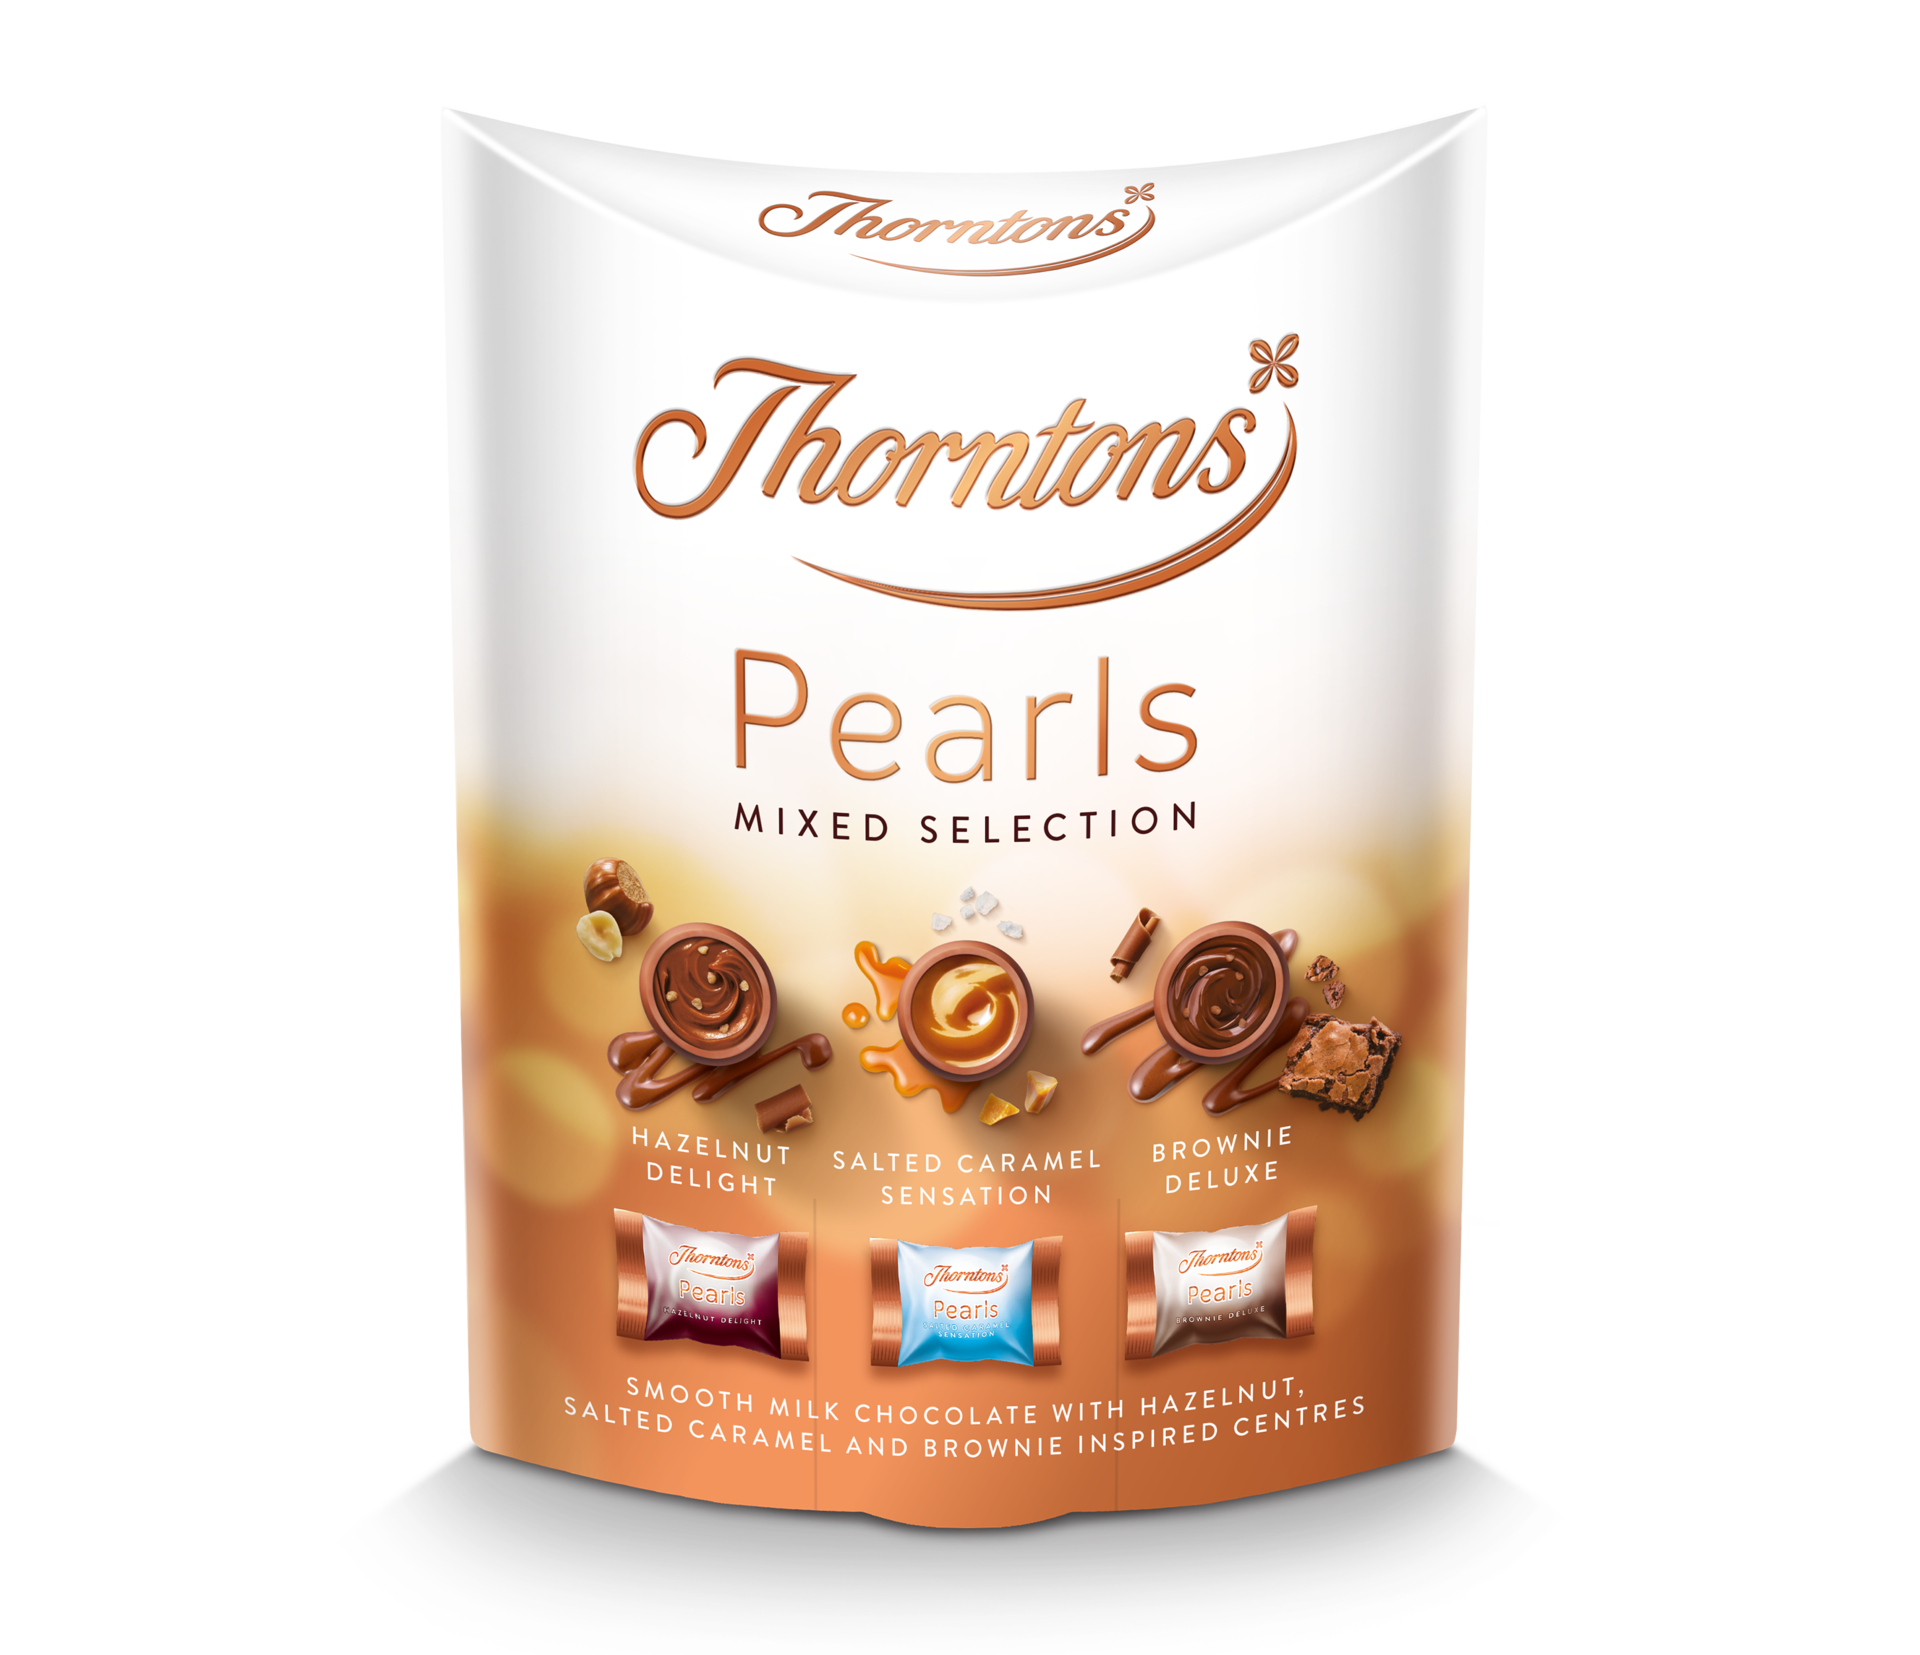 https://www.thorntons.com/medias/sys_master/images/h1a/hc5/8916767113246/77233280_main/77233280-main.png?resize=xs-s-xs